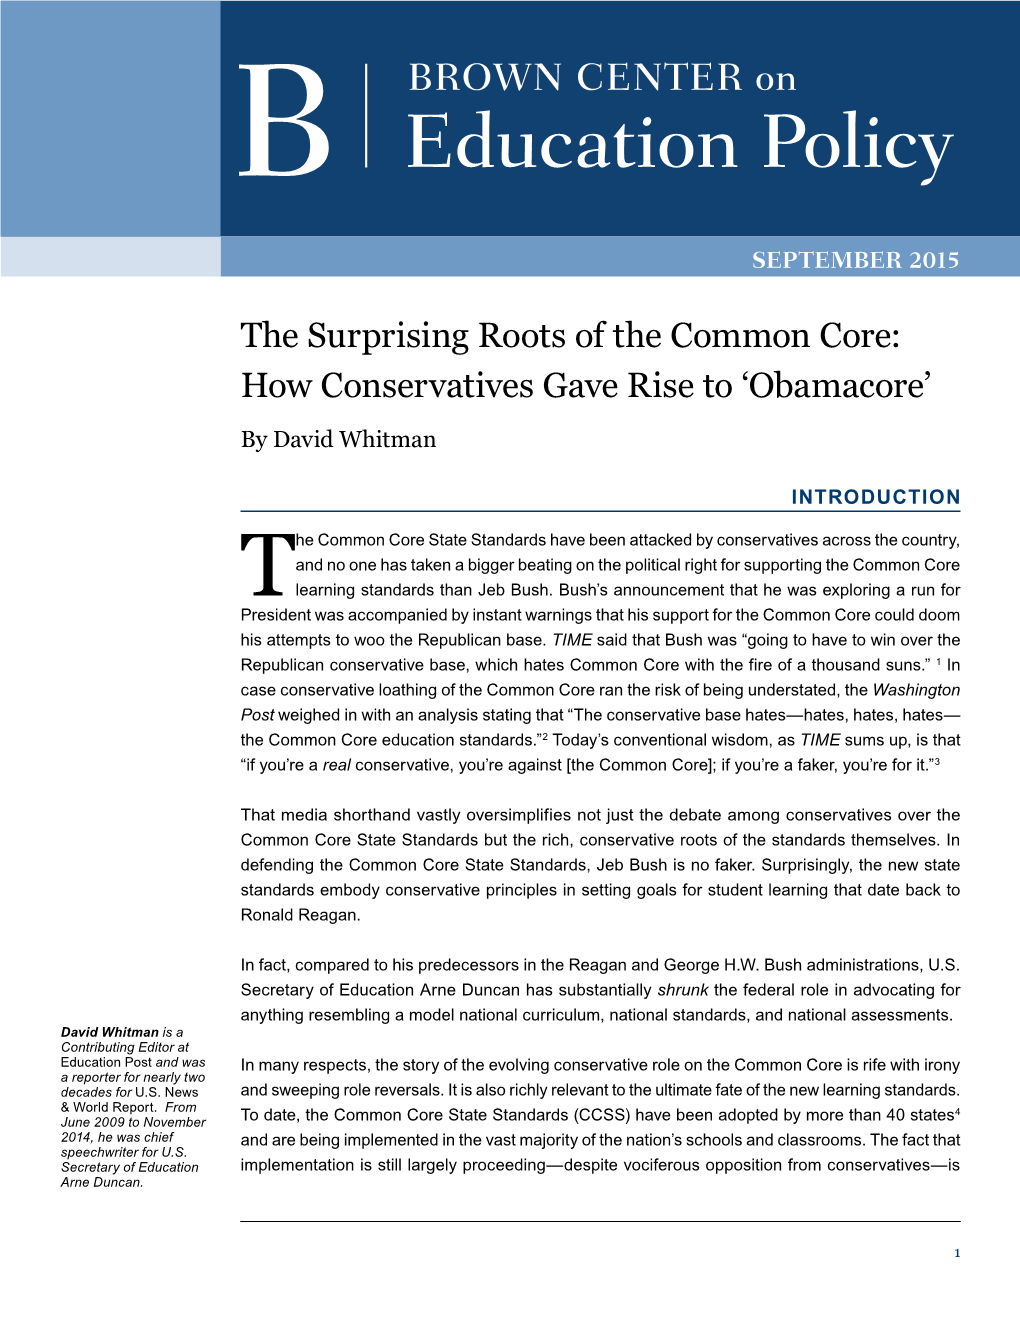 Surprising Roots of the Common Core: How Conservatives Gave Rise to ‘Obamacore’ by David Whitman